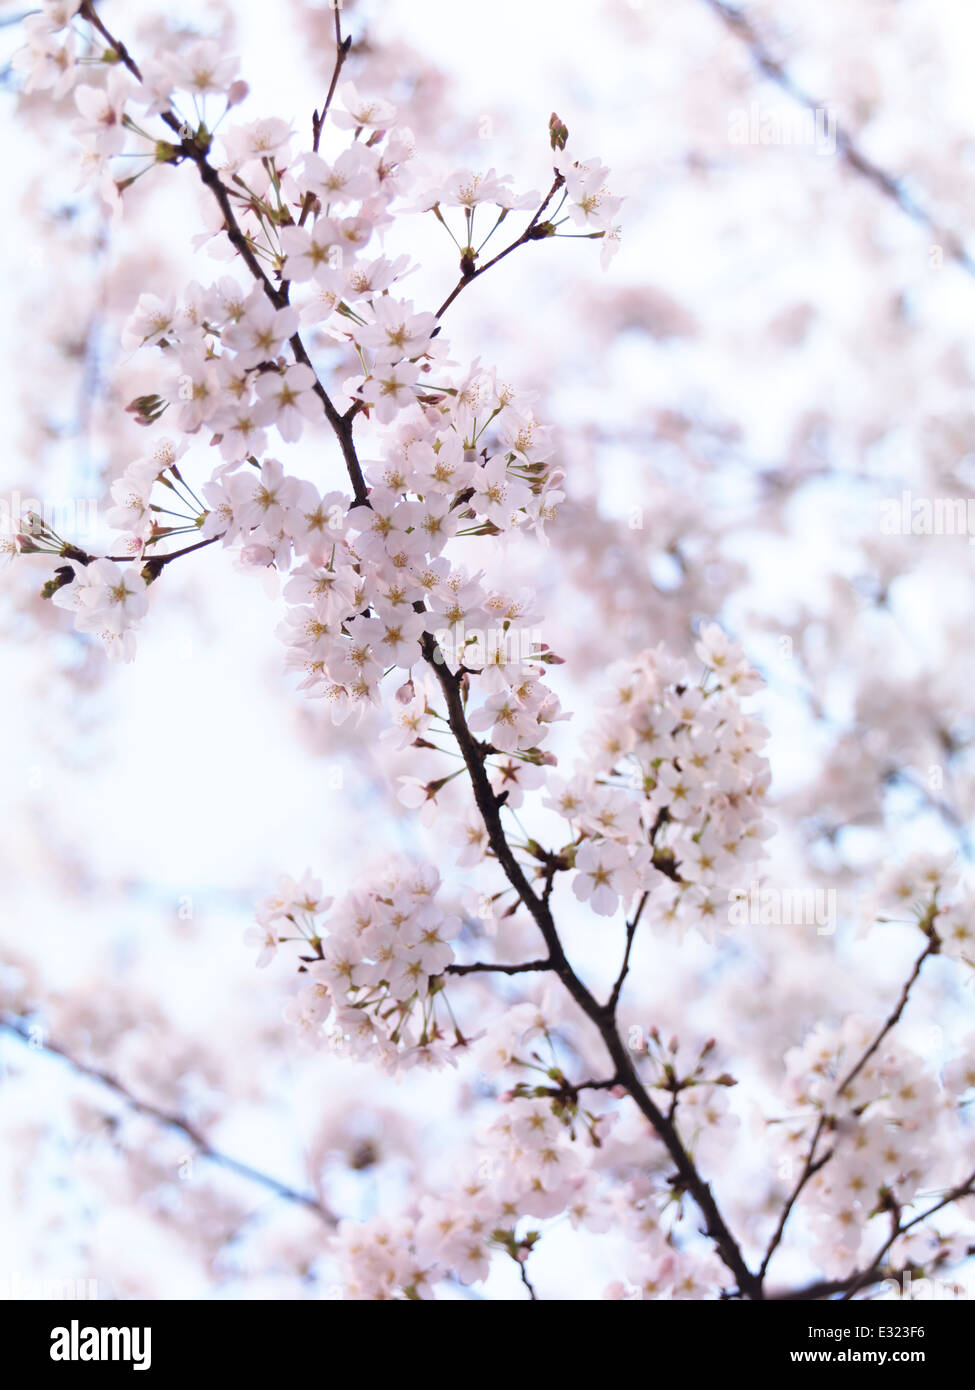 Closeup of cherry blossoms, blooming Japanese cherry tree flowers artistic background Stock Photo